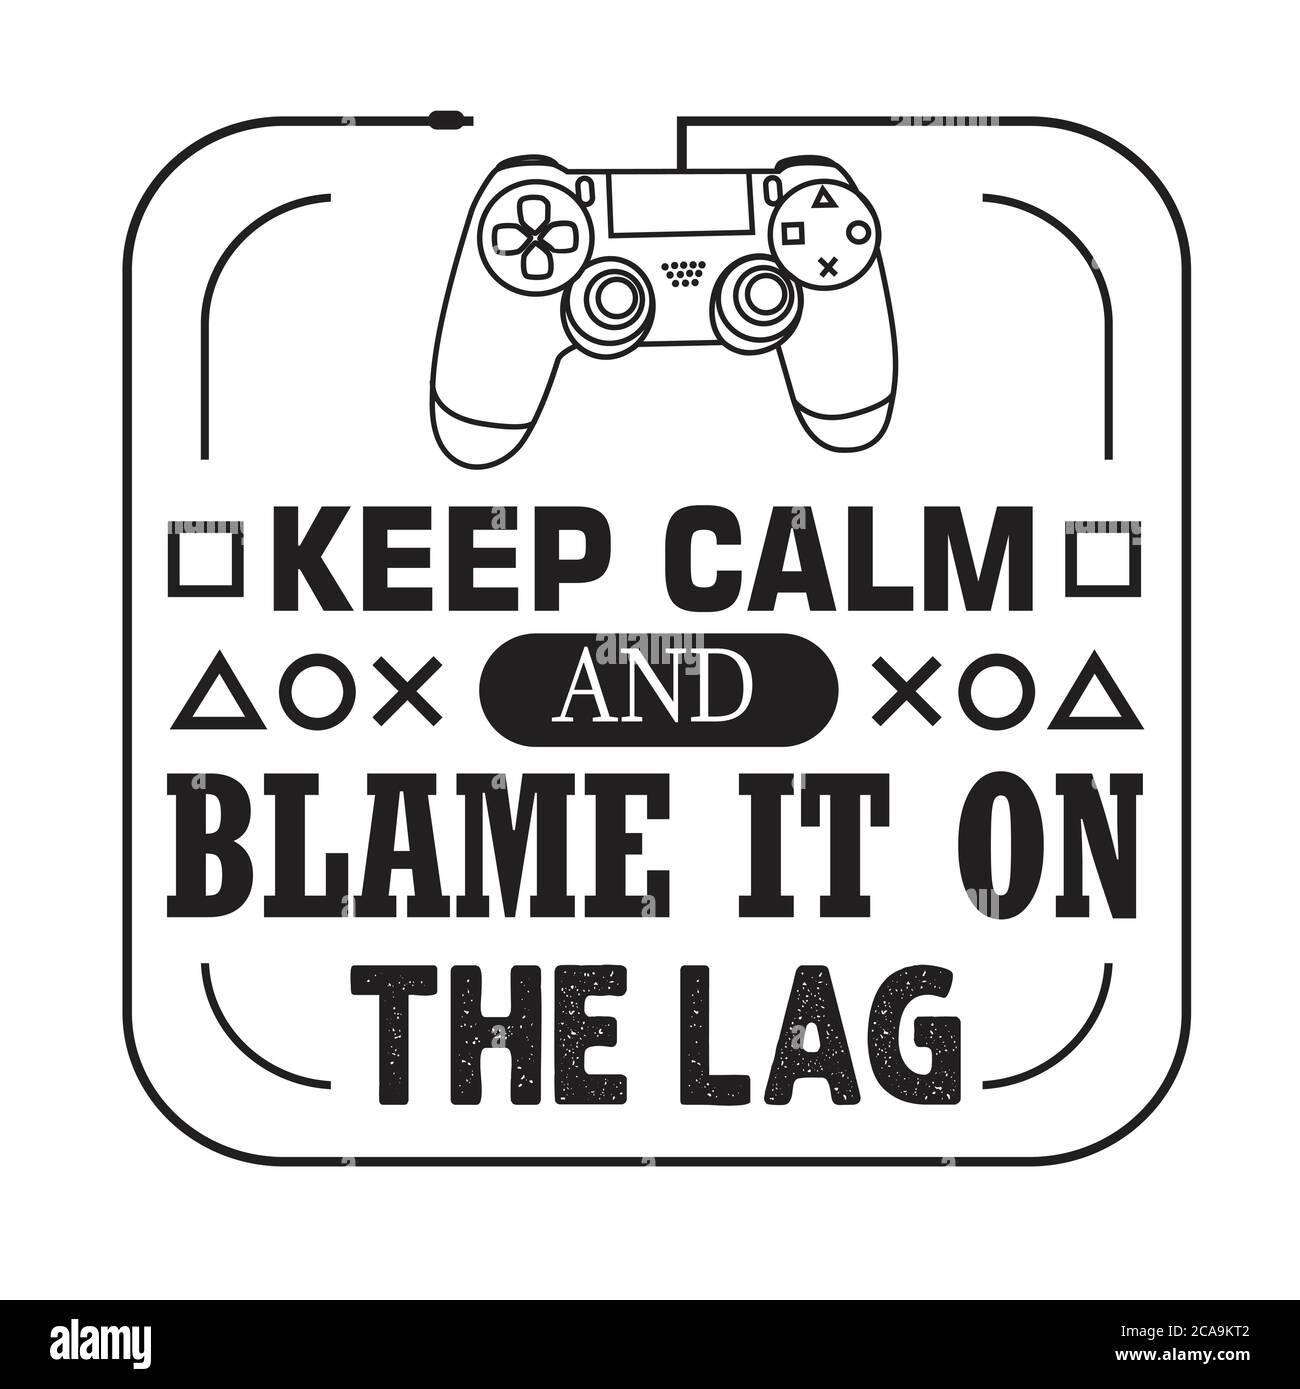 Gamer Quotes and Slogan good for T-Shirt. Video Games Ruined My